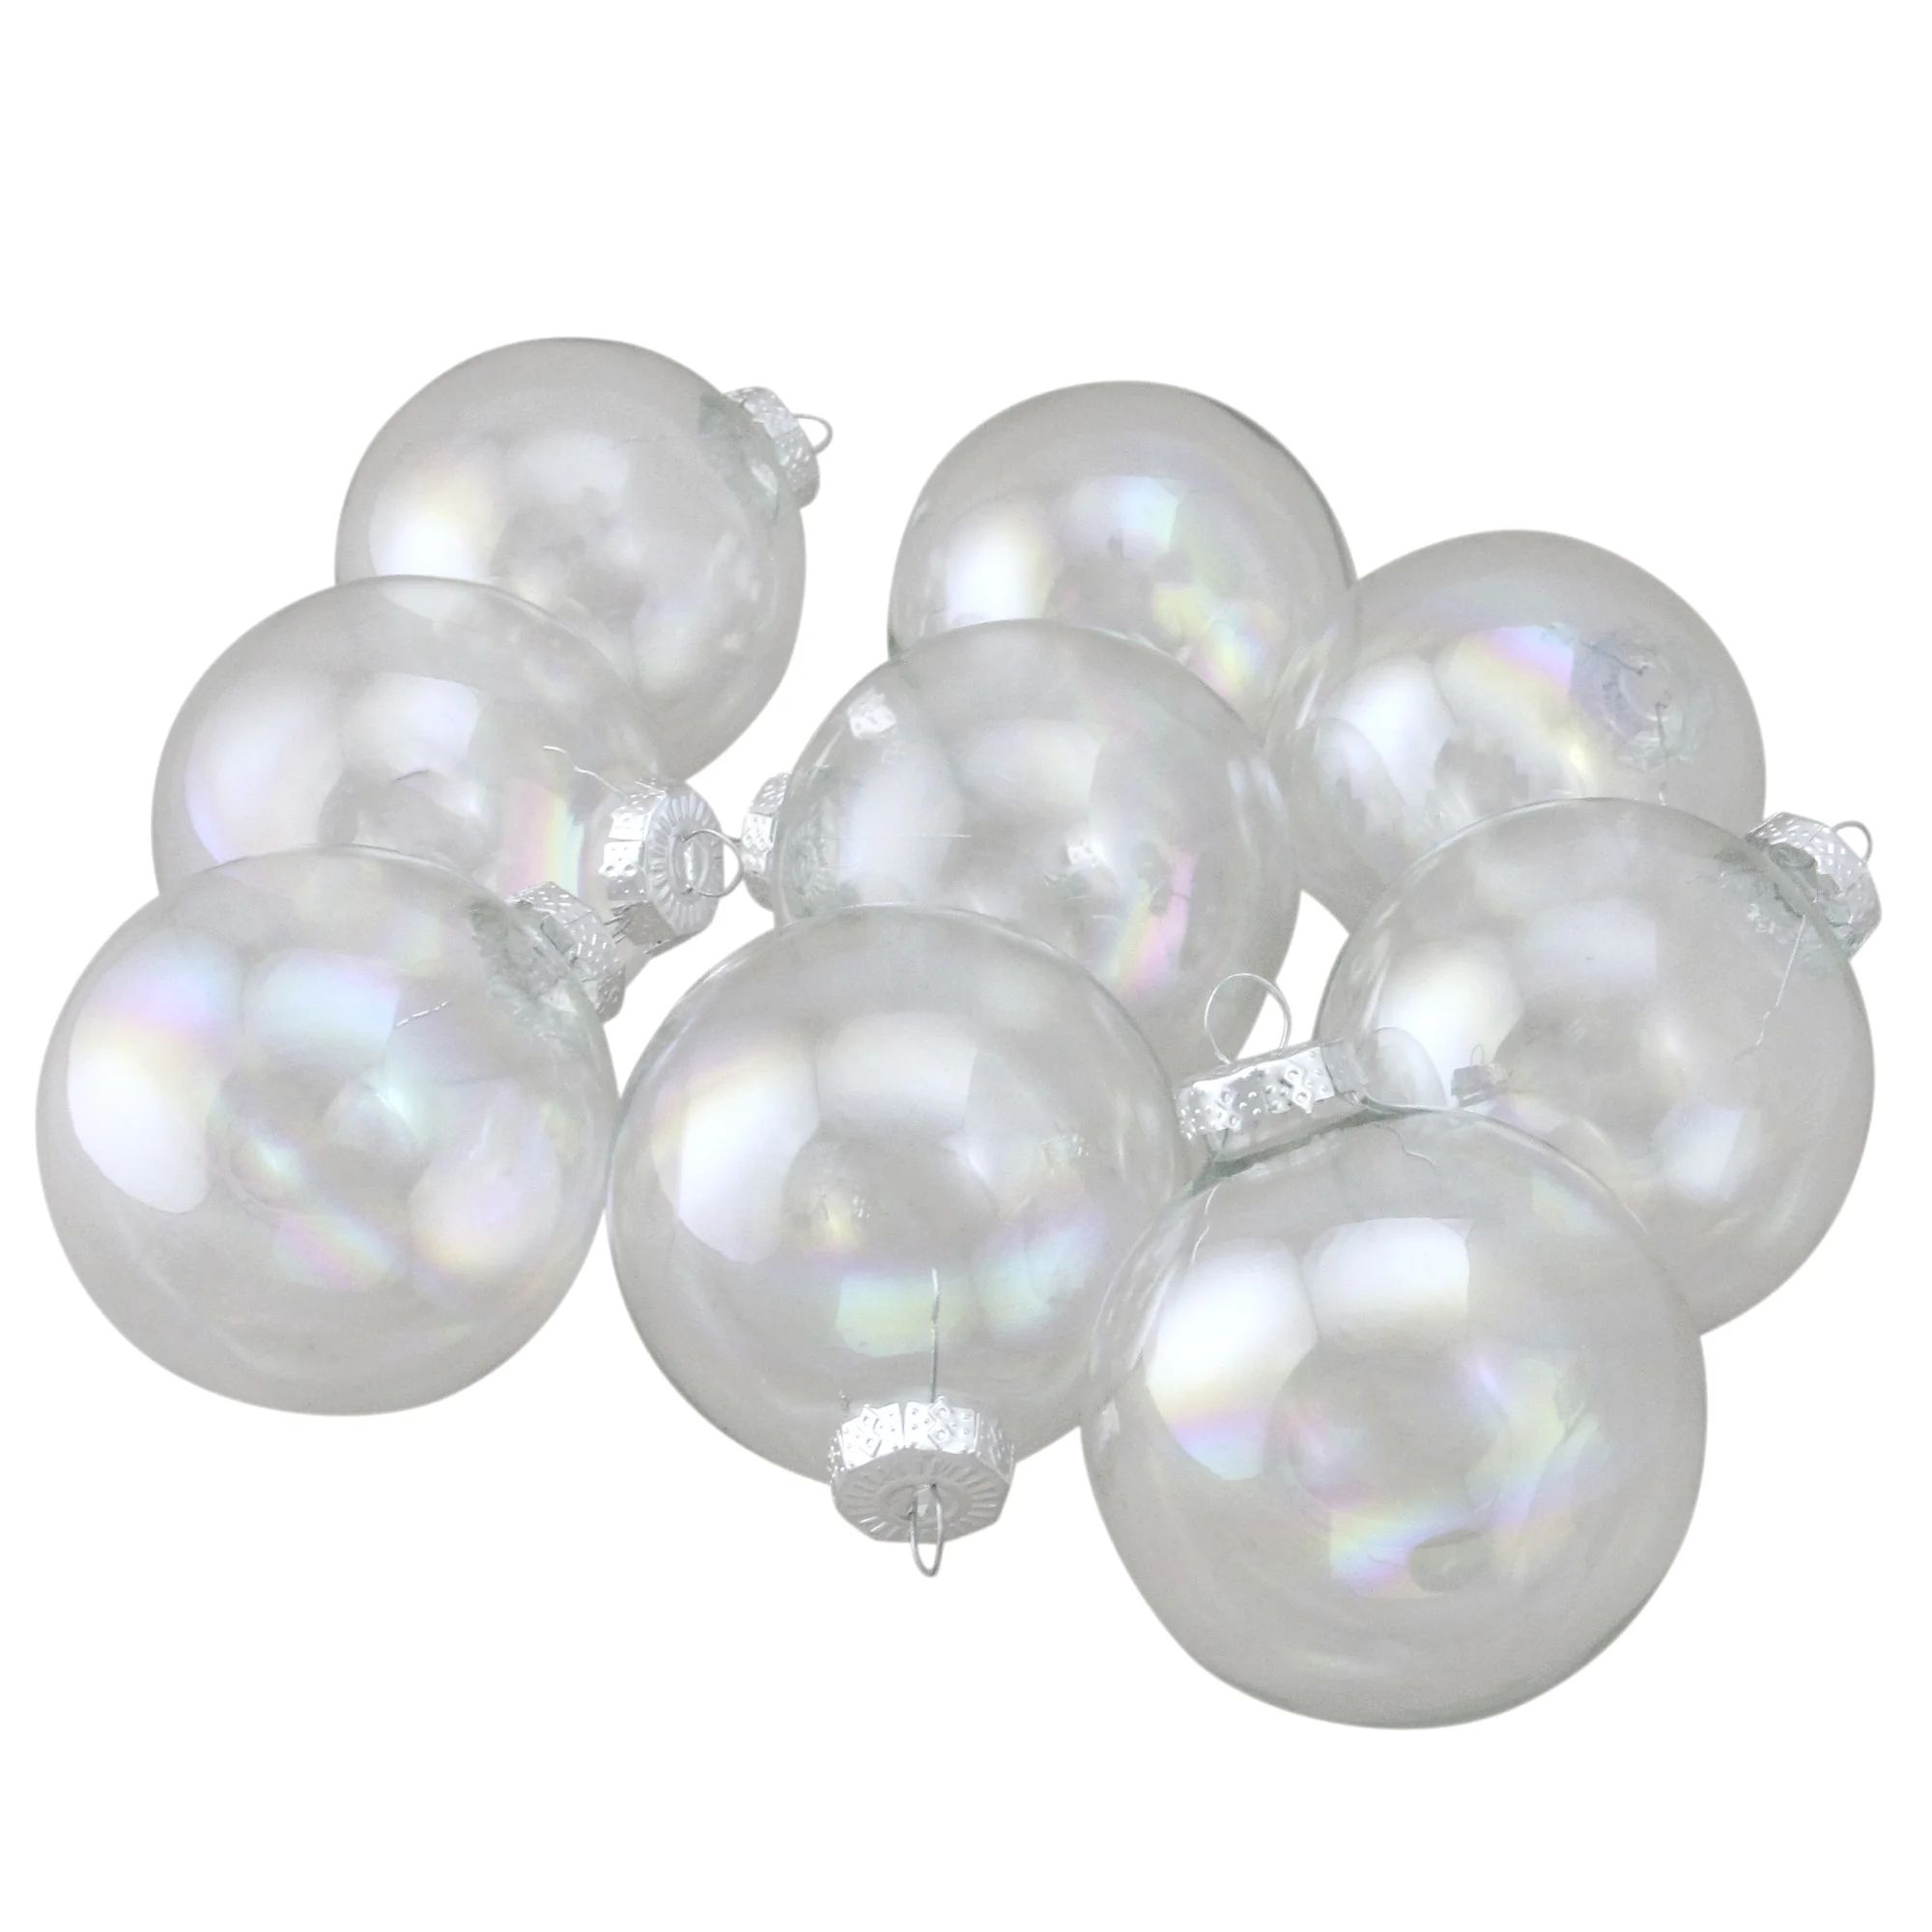 9ct Clear and Silver Iridescent Glass Christmas Ball Ornaments 2.5" (65mm) | Walmart (US)